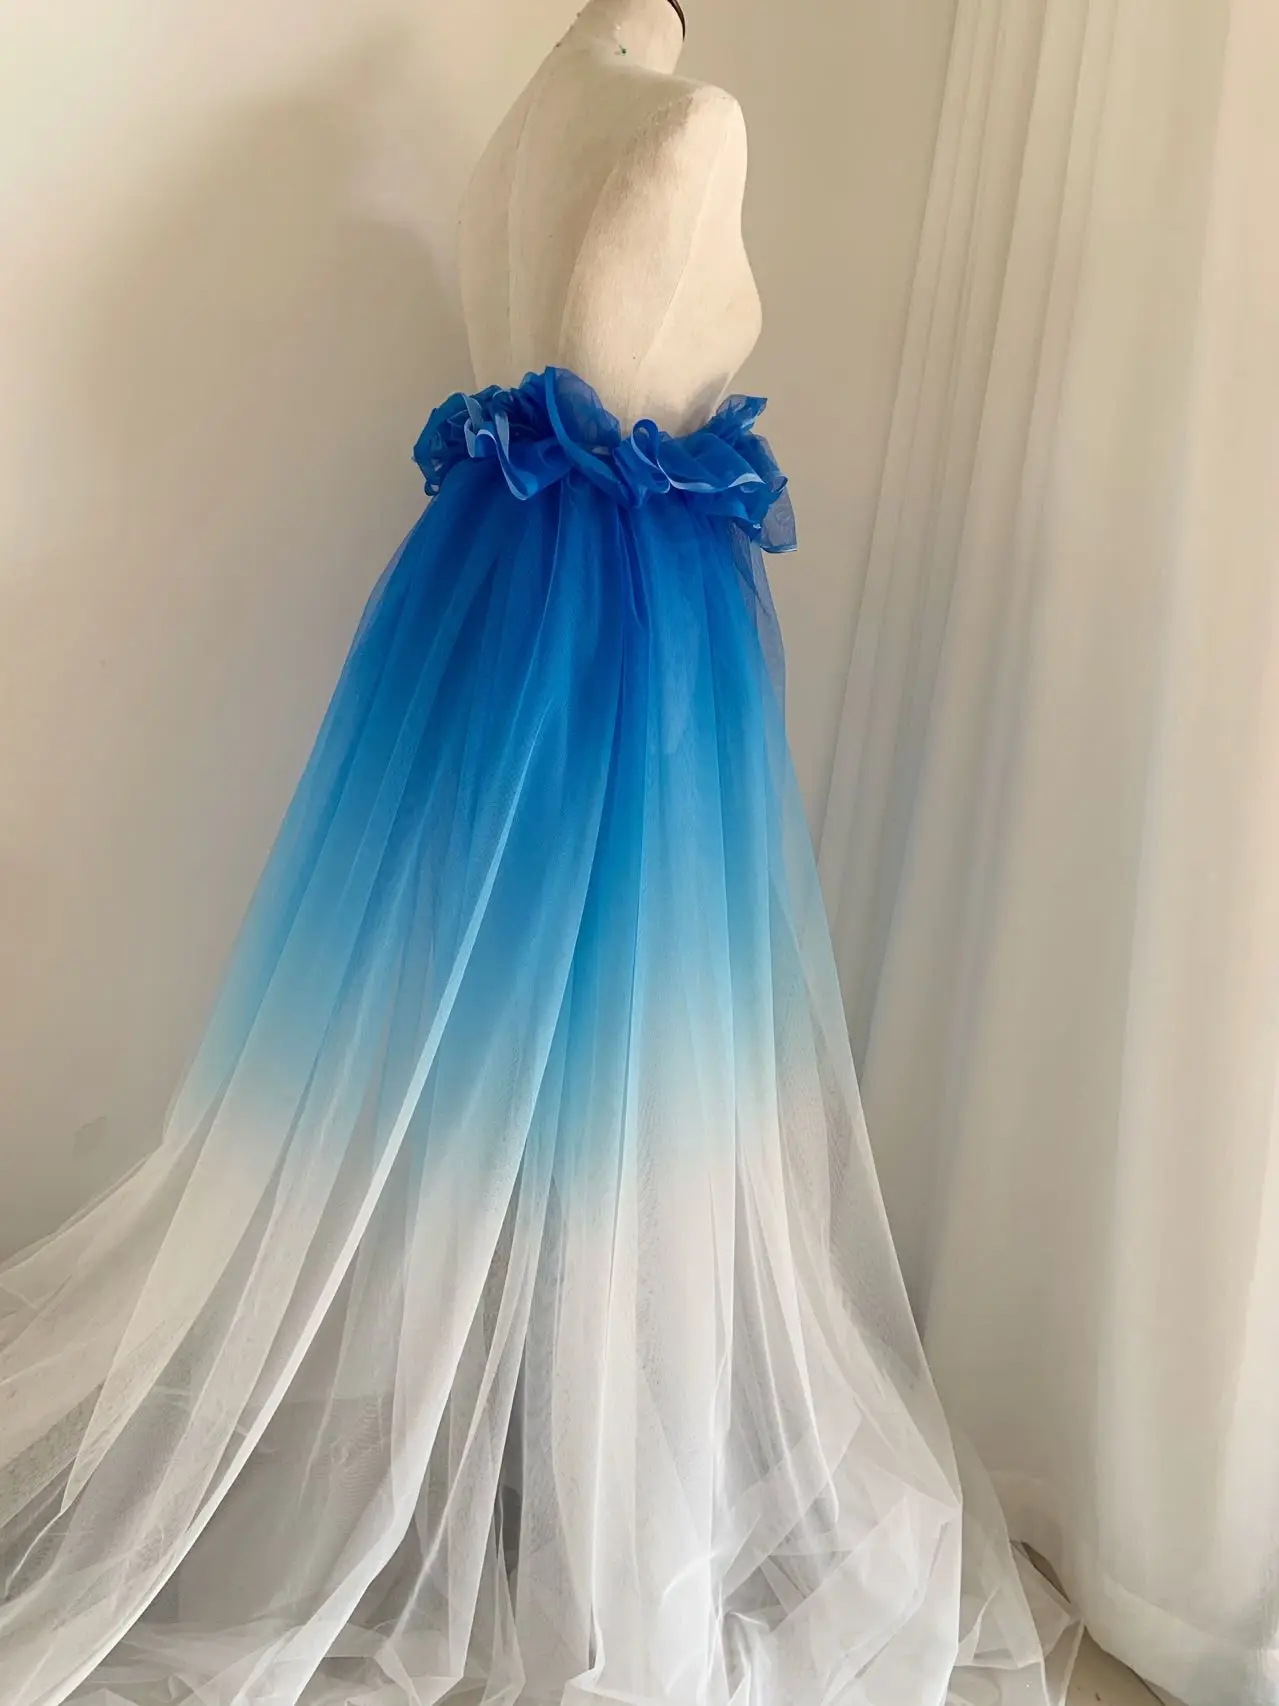 

5 Yards Ombre Colors Tulle Lace Fabric White and Blue Gradient Netting Dip Dye Gauze for Haute Dress,Girls Skirt,Free Shipping